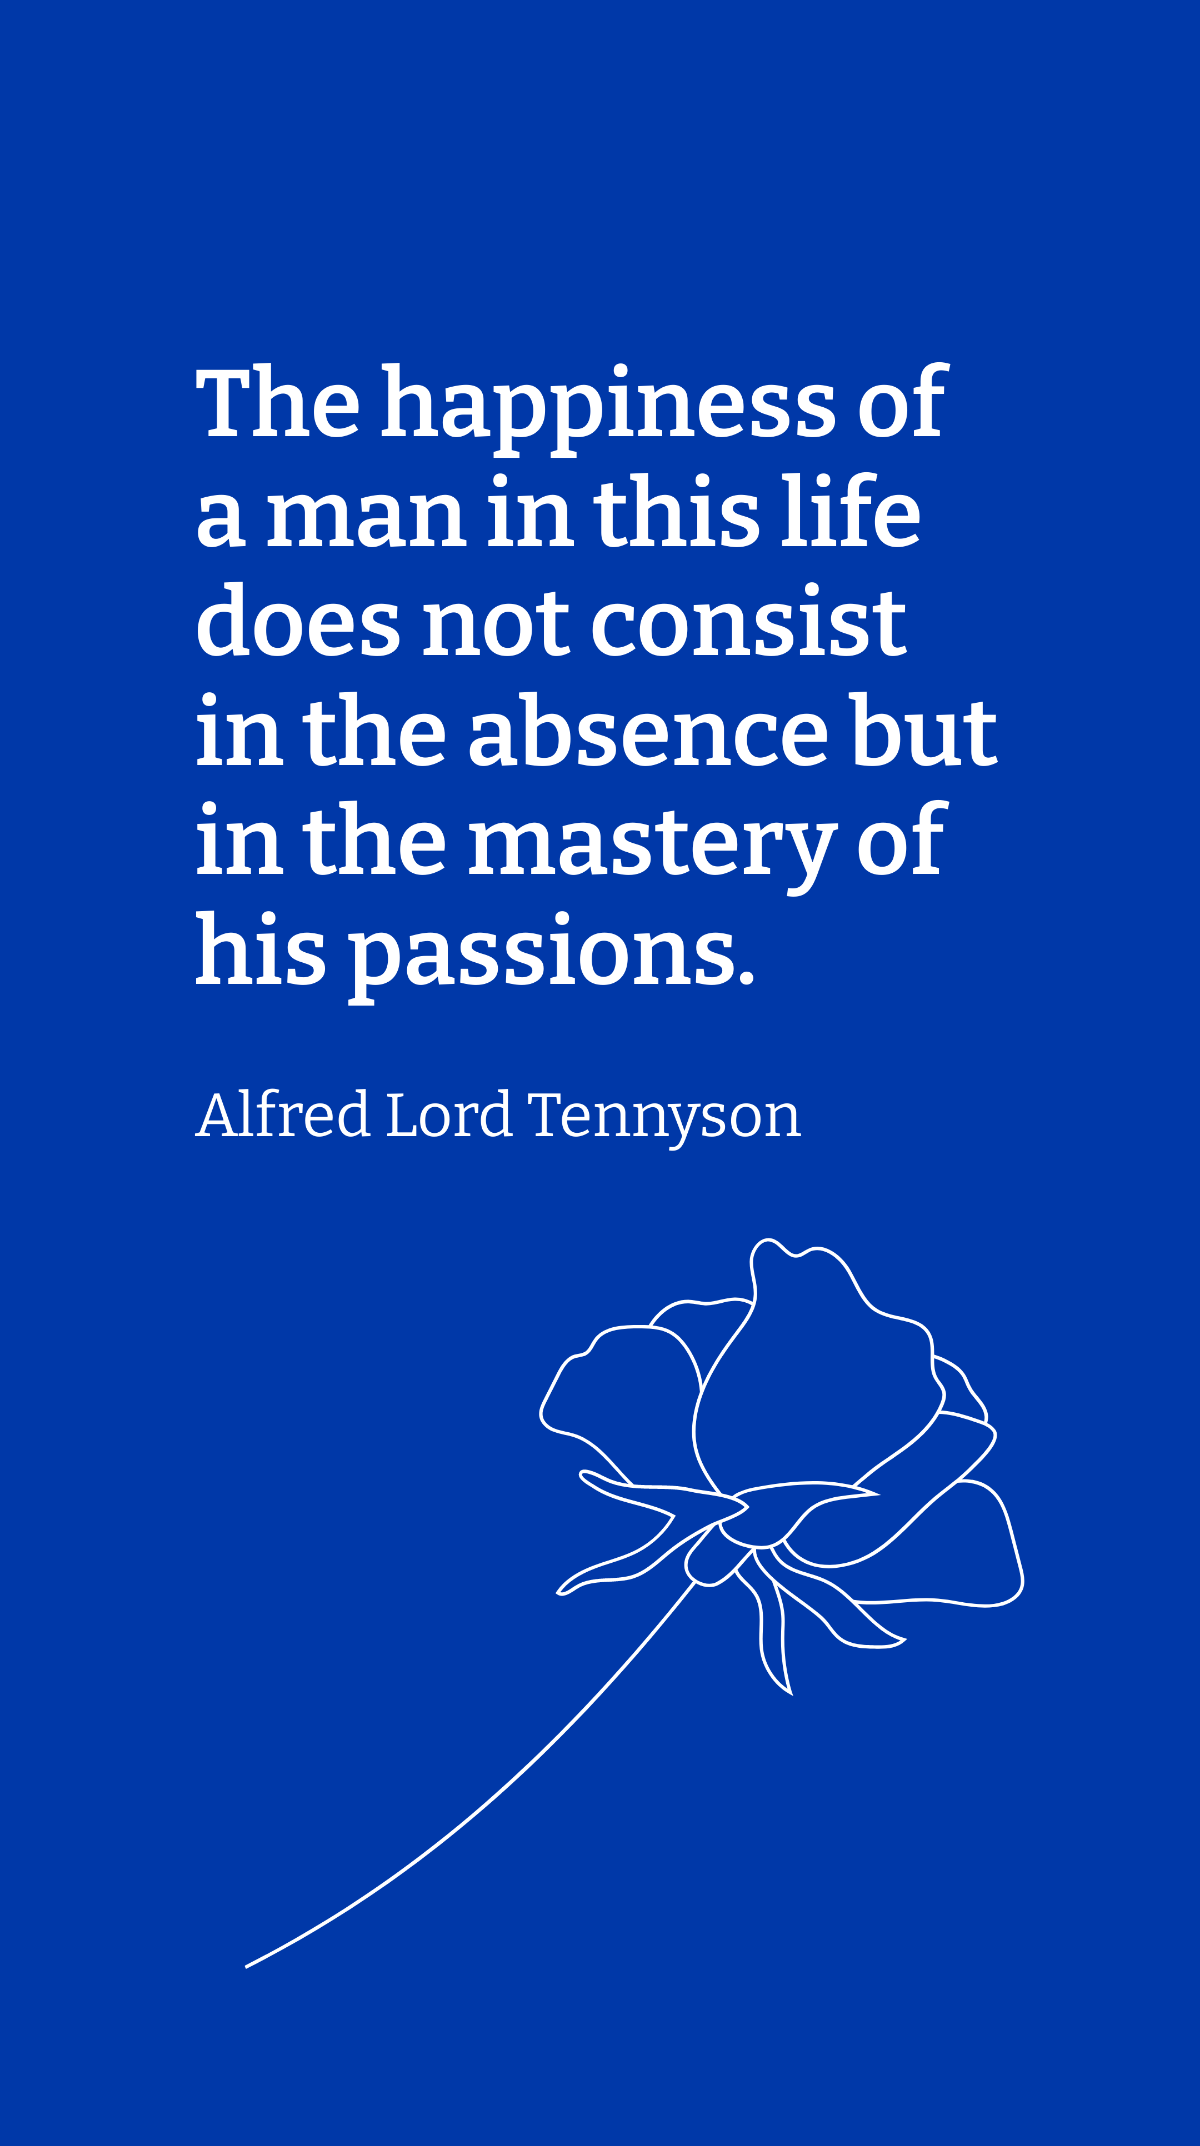 Alfred Lord Tennyson - The happiness of a man in this life does not consist in the absence but in the mastery of his passions. Template